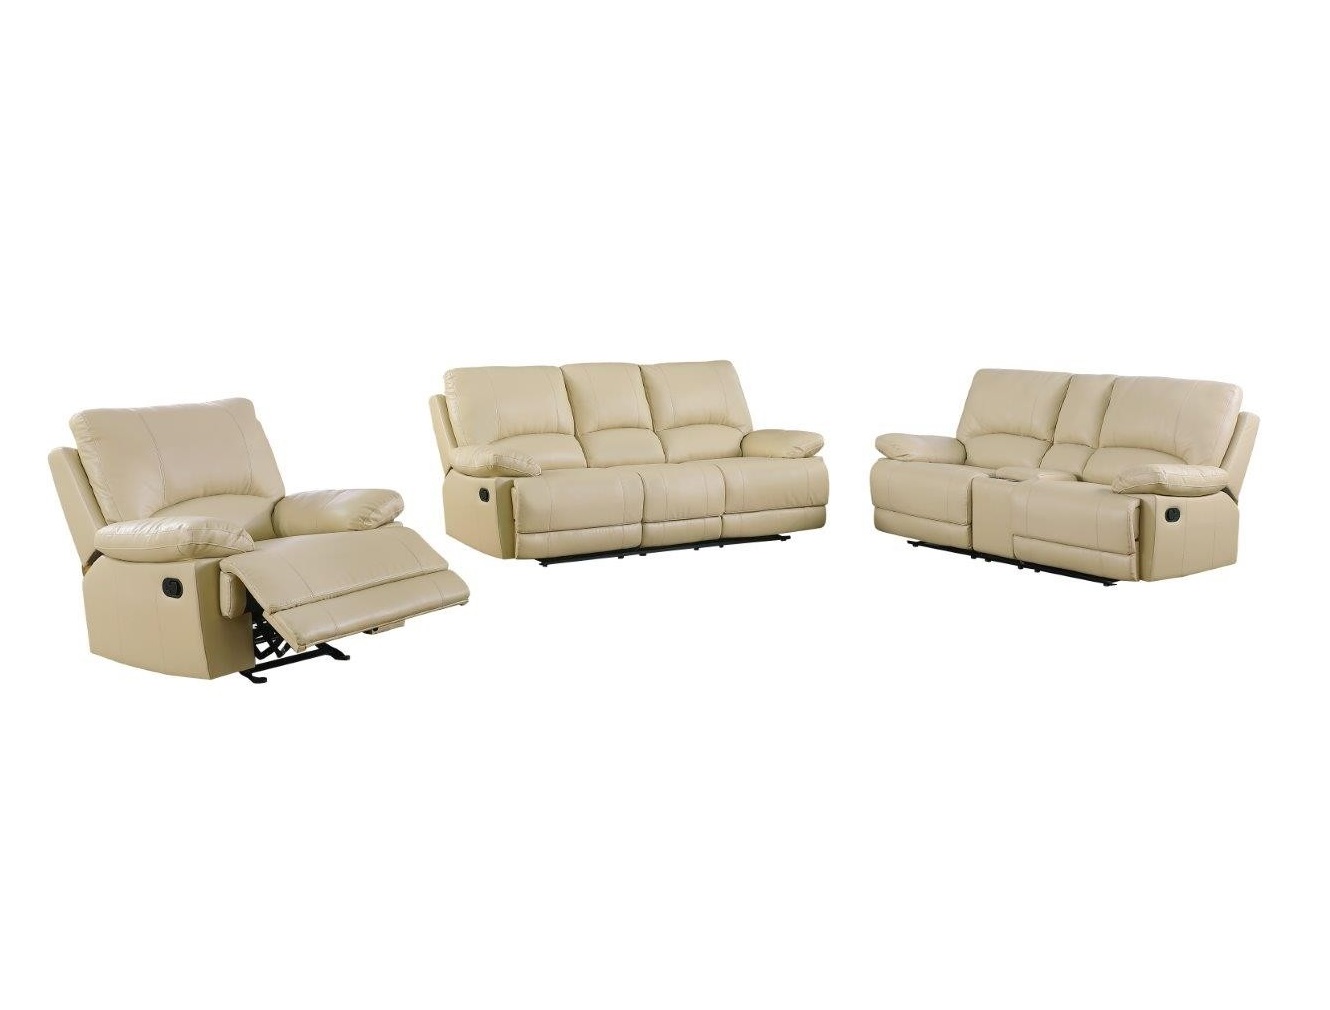 Three Piece Indoor Beige Faux Leather Five Person Seating Set-343904-1